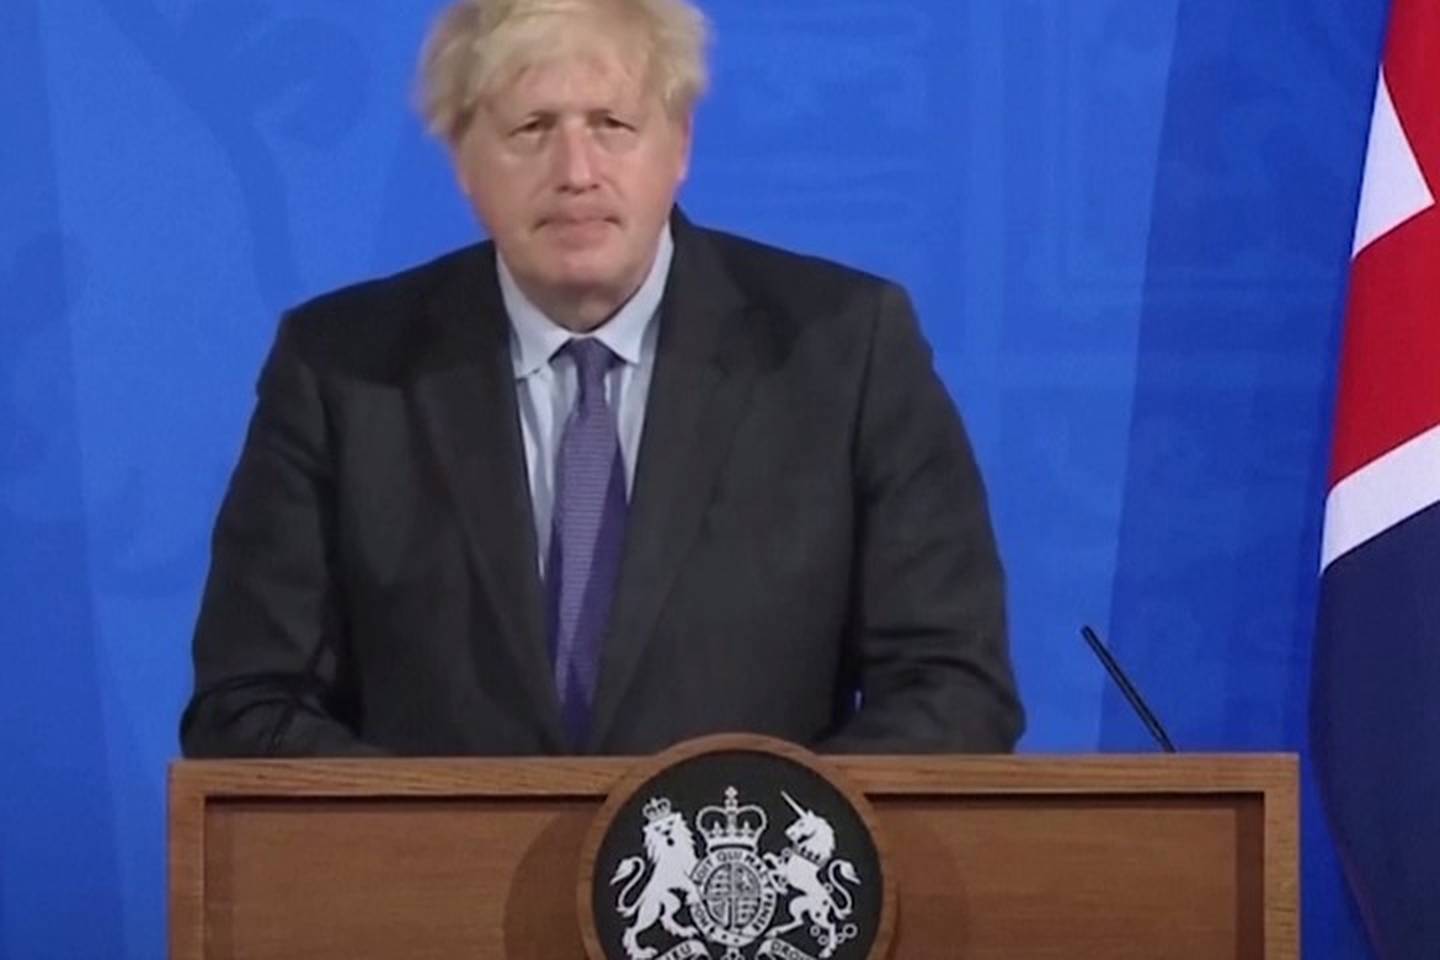 UK prime minister confirms Covid-19 lockdown easing in England delayed to July 19